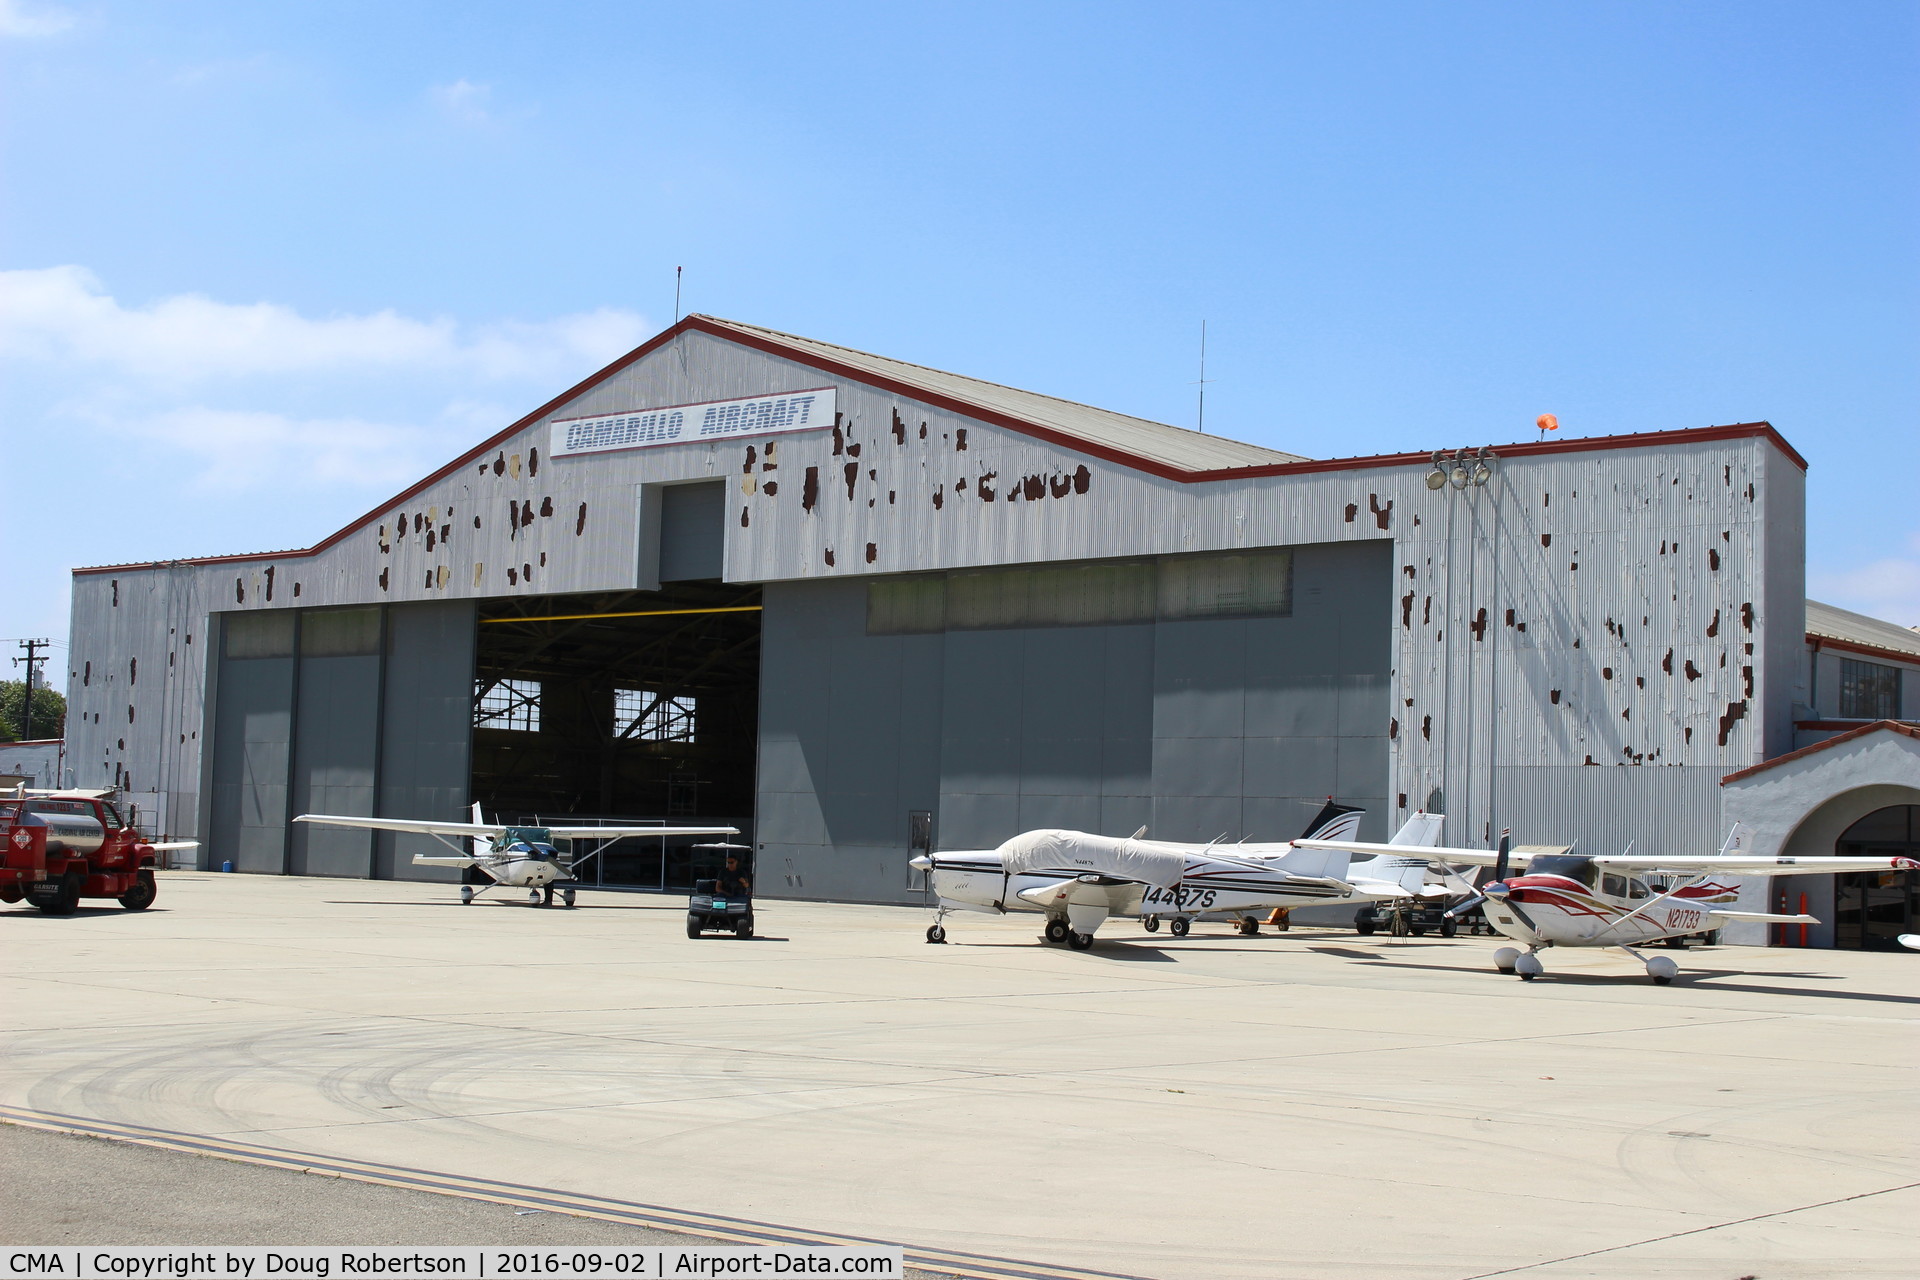 Camarillo Airport (CMA) - Camarillo Aircraft hangar, shared with Ventura County Sheriff's and Fire Helicopters Unit at opposite end of hangar. Now in 2019 entire hangar is used by Ventura County Sheriff and Fire Dept.